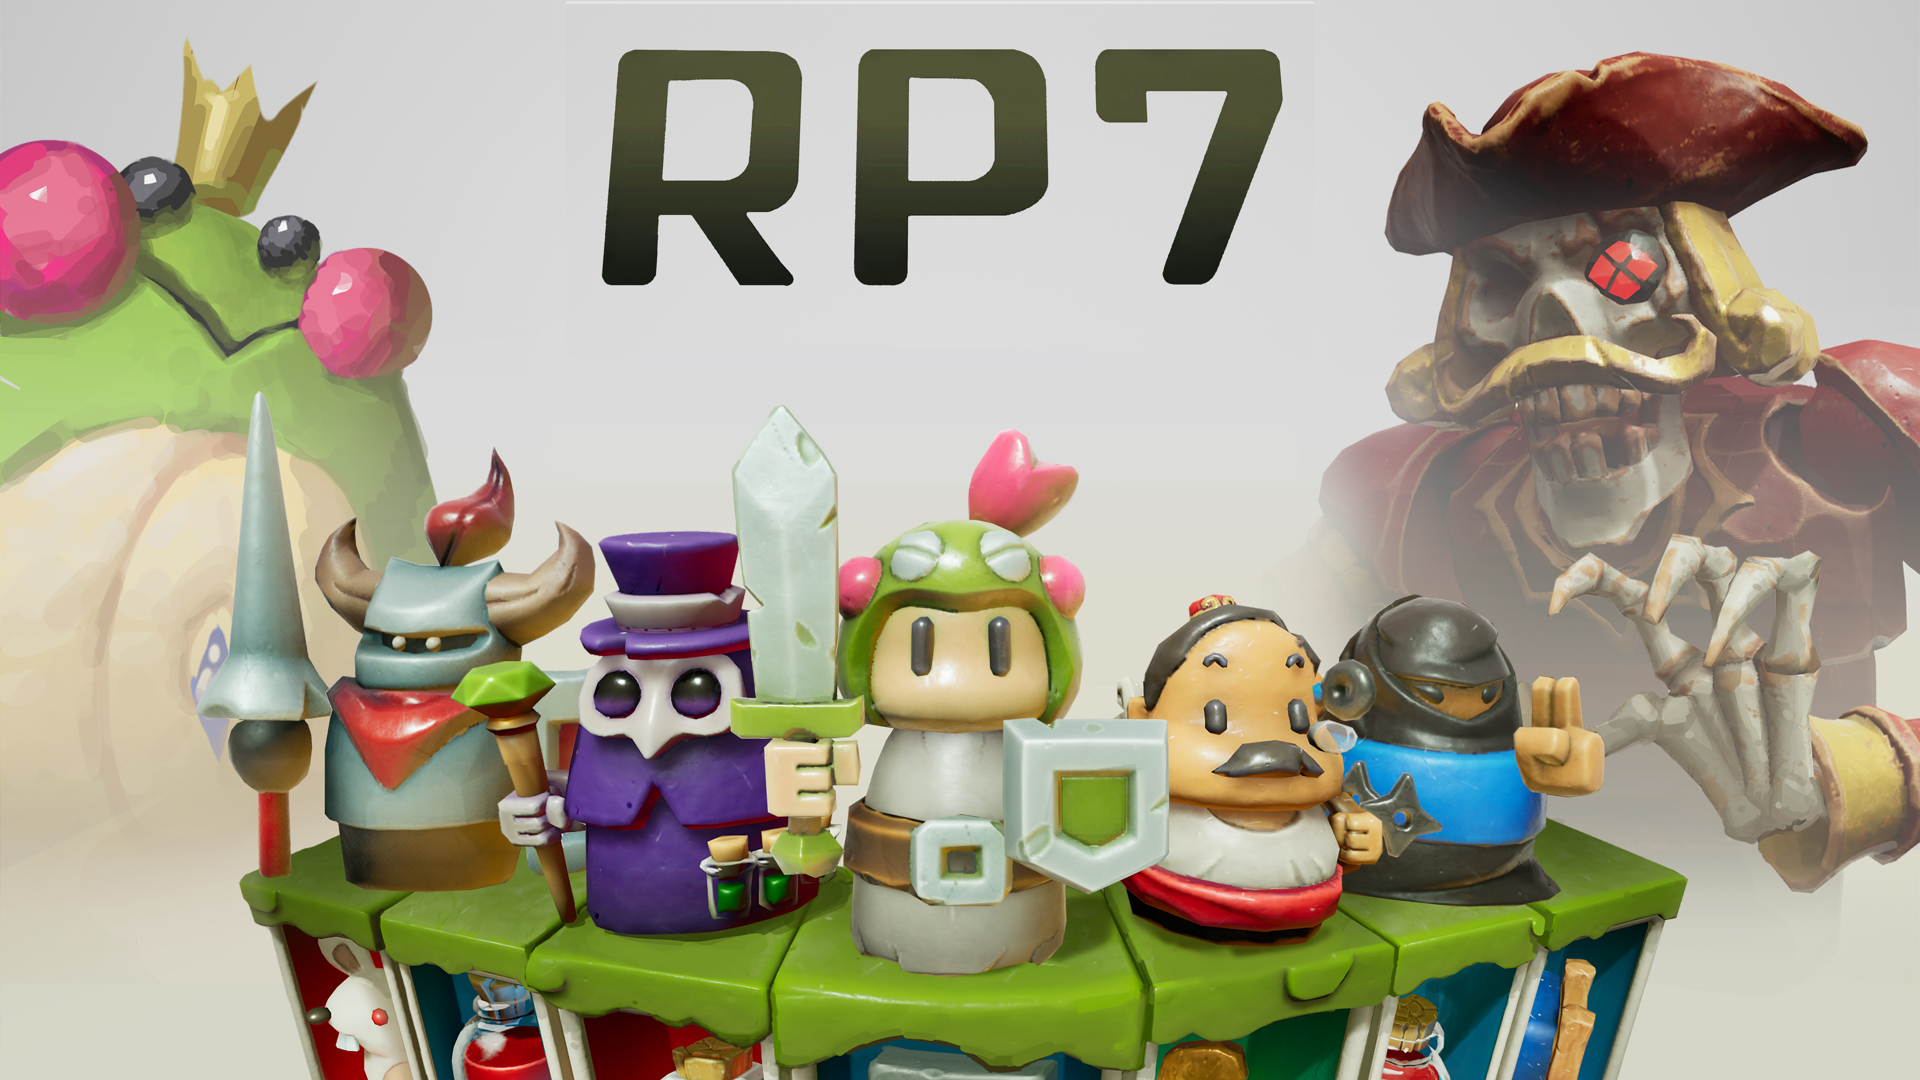 Play your slots right in cute fantasy adventure RP7; demo lands ahead of Early Access launch